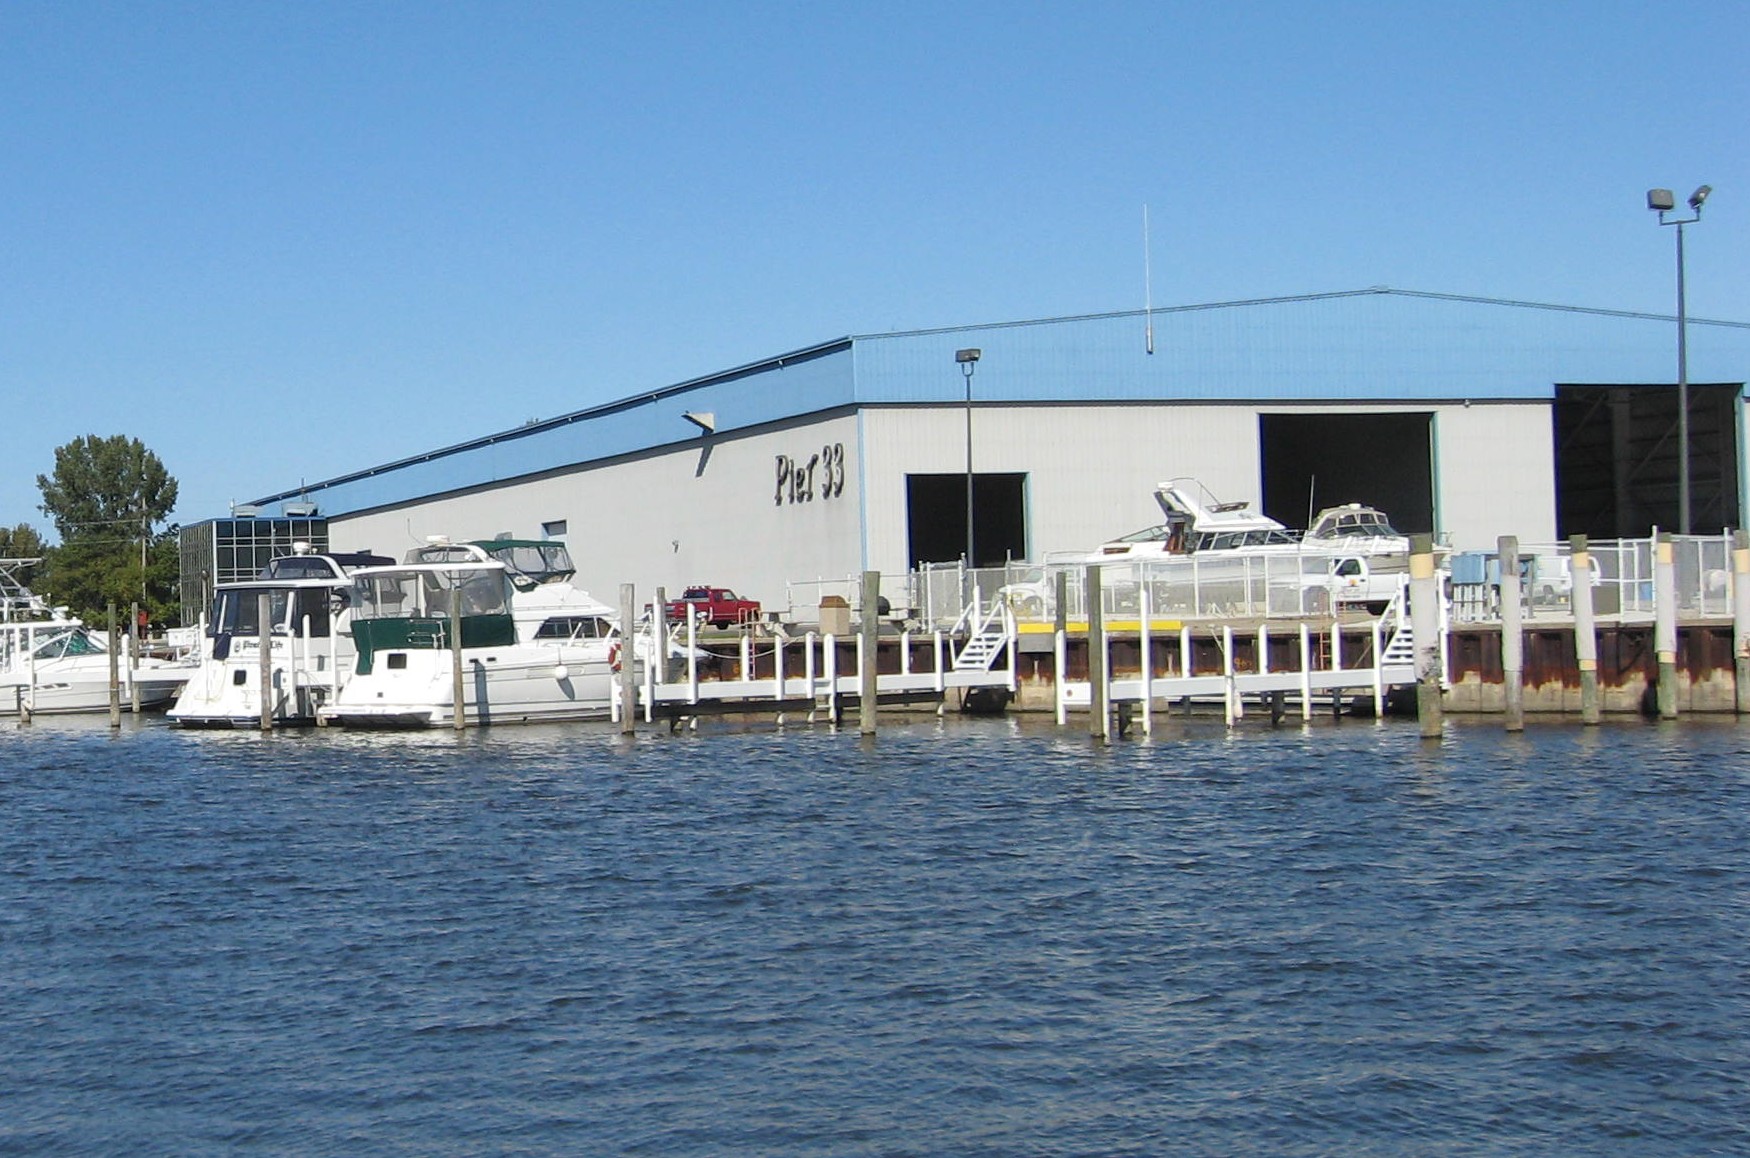 Pier 33 Marina is a full service marina featuring new boat sales, docks, storage, boat repair and maintenance.